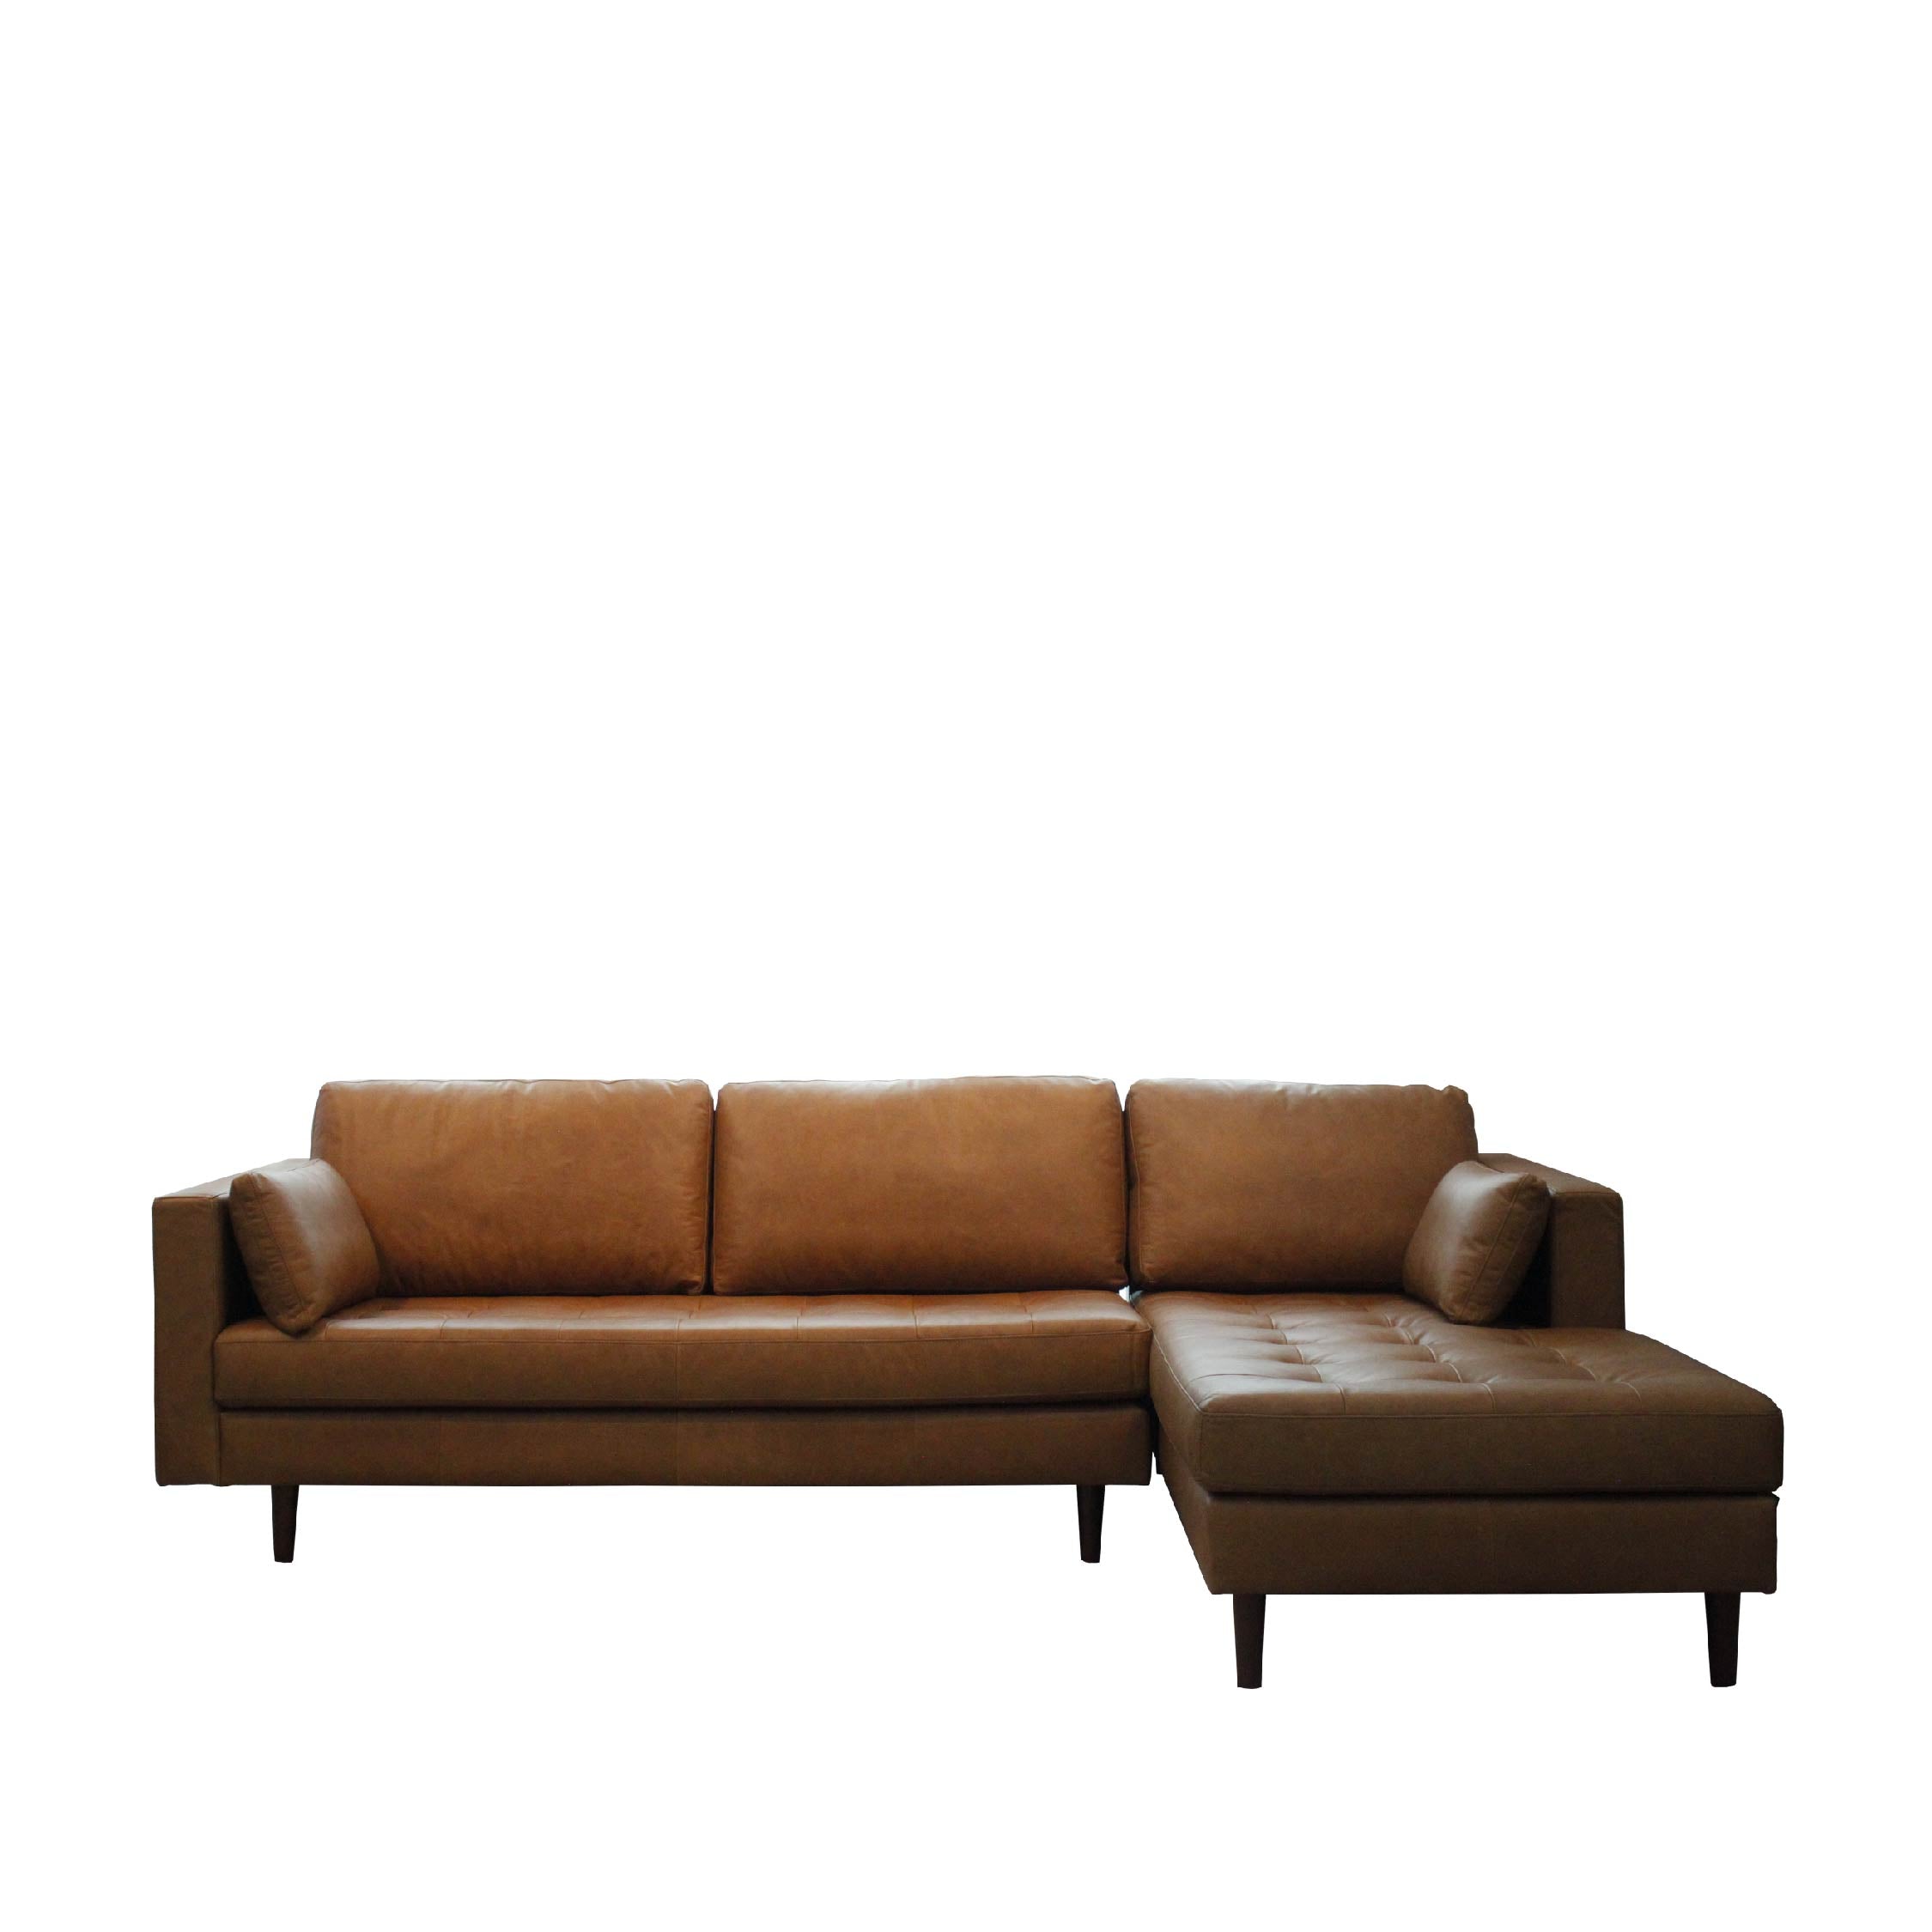 NORDI Sofa 3 Seater L Shape Right Sectional Exhibit Sale at Seremban 2 Offline Store